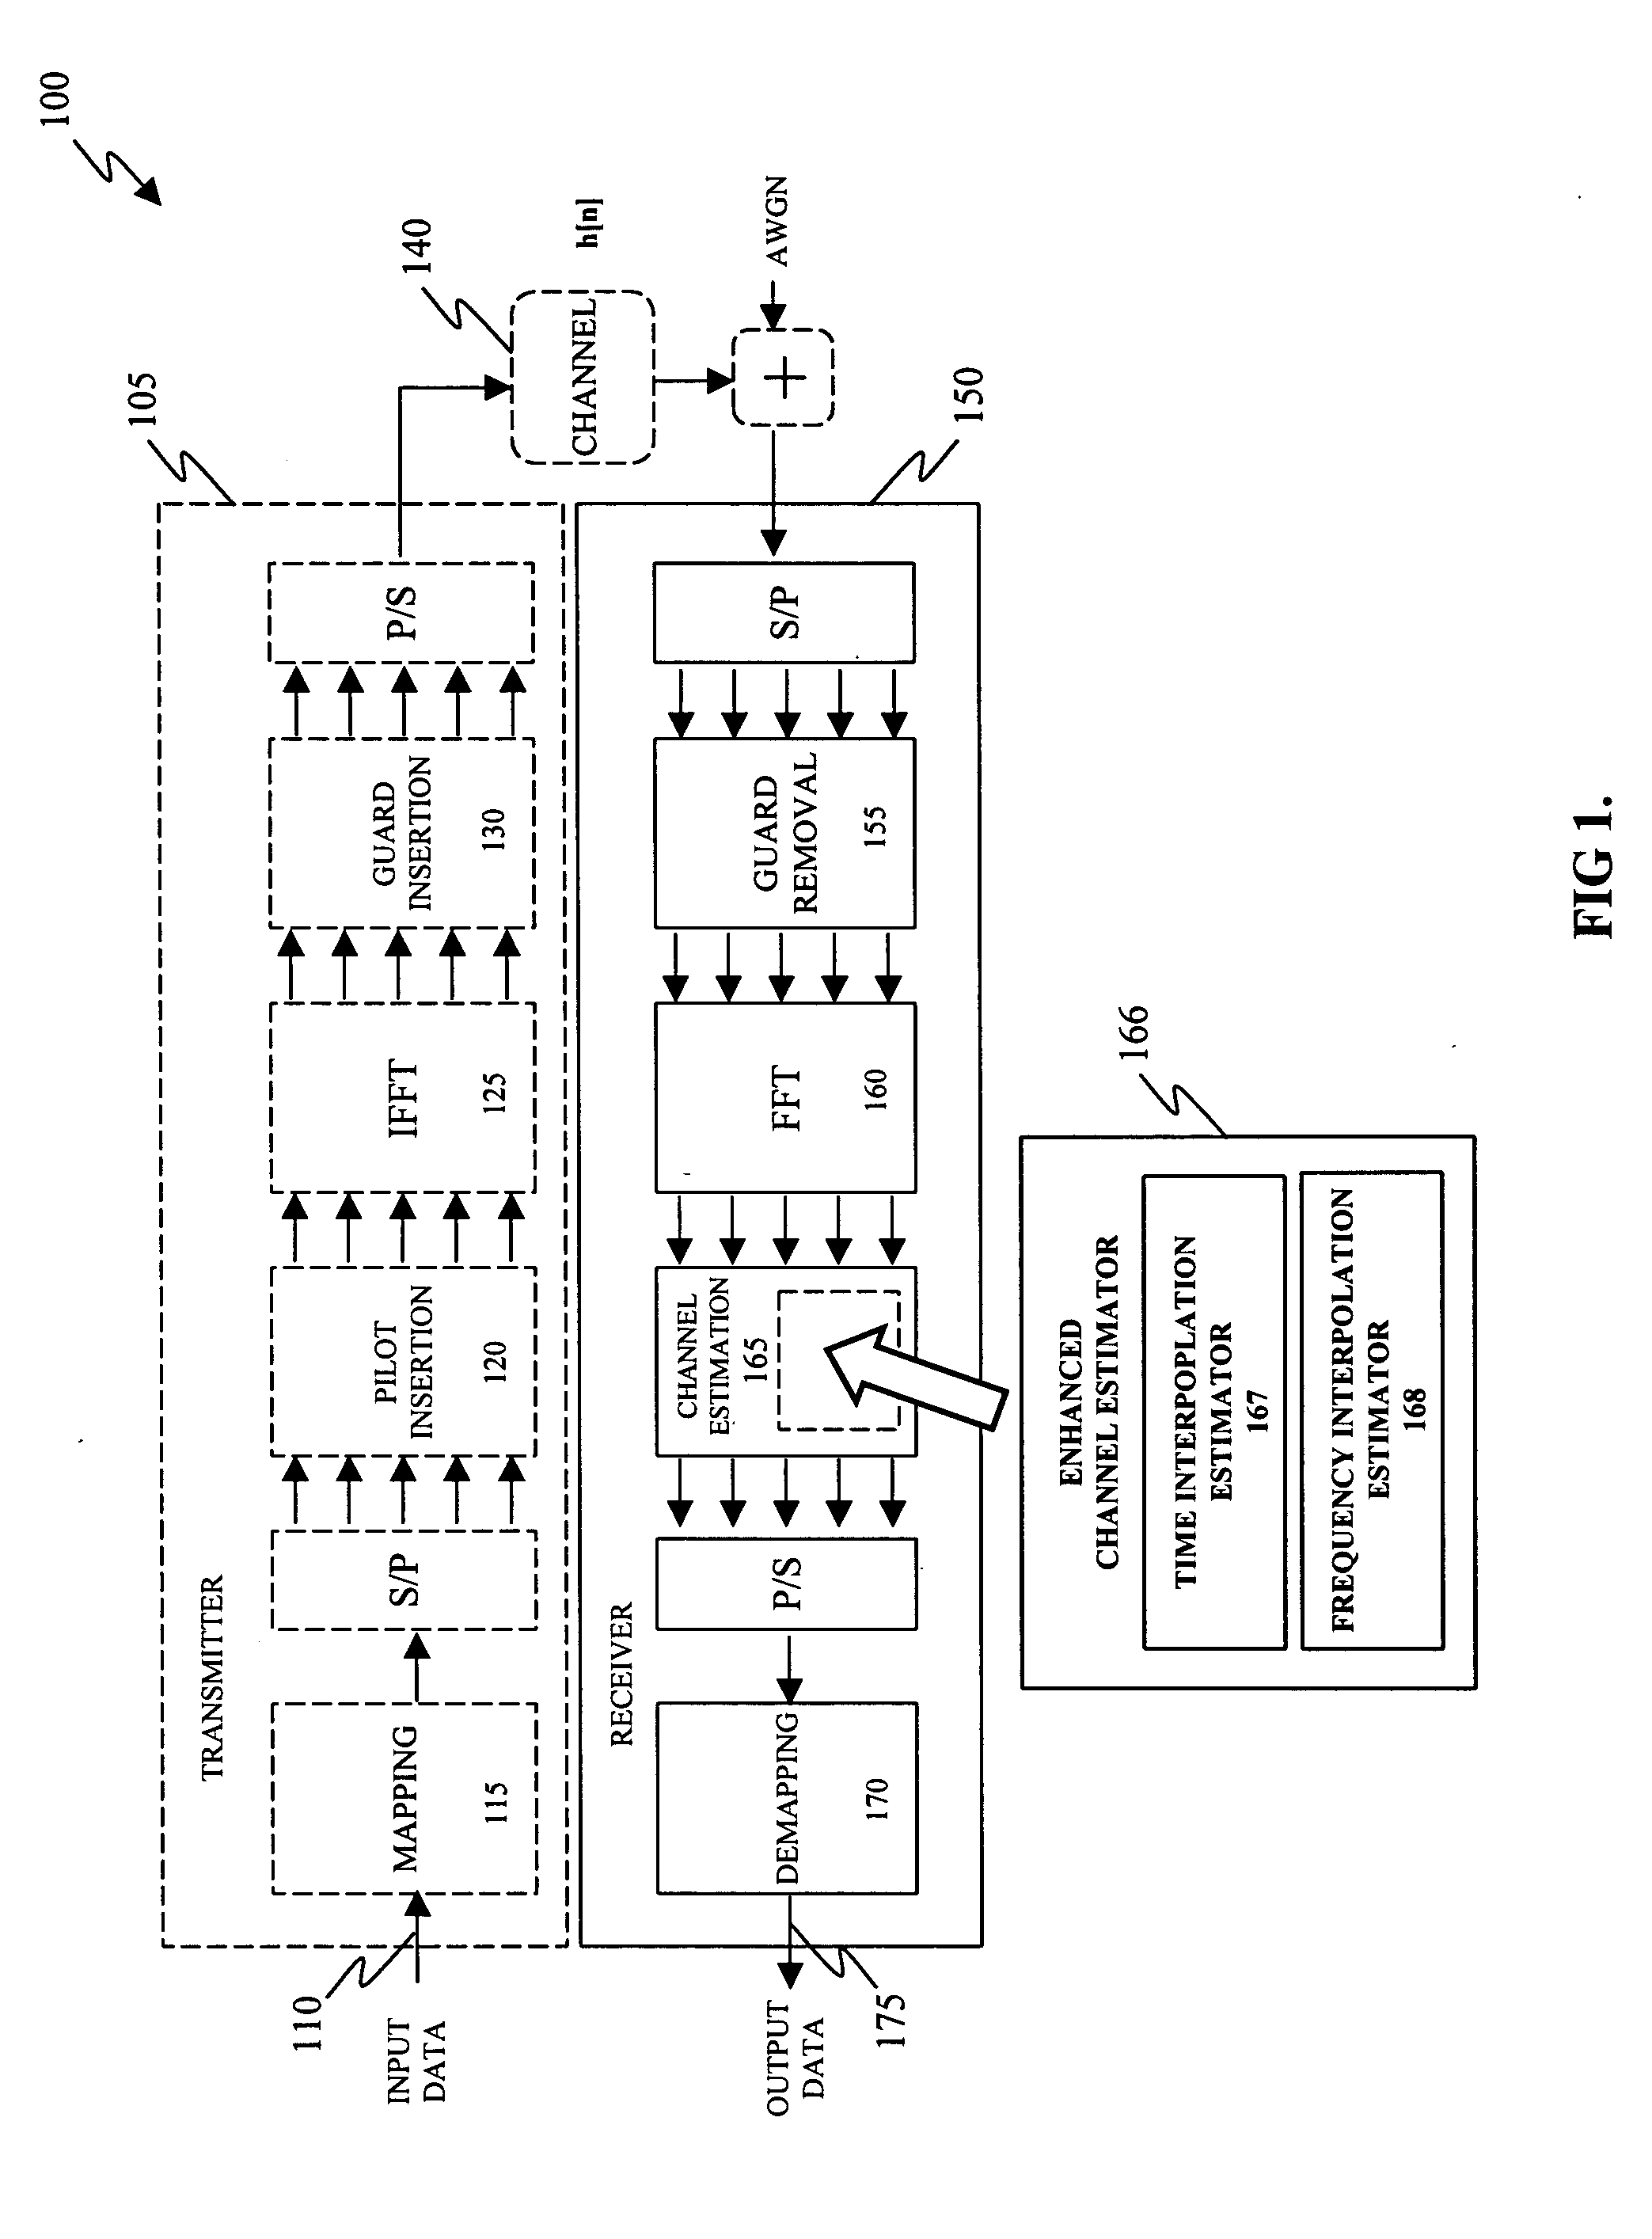 Enhanced channel estimator, method of enhanced channel estimating and an OFDM receiver employing the same